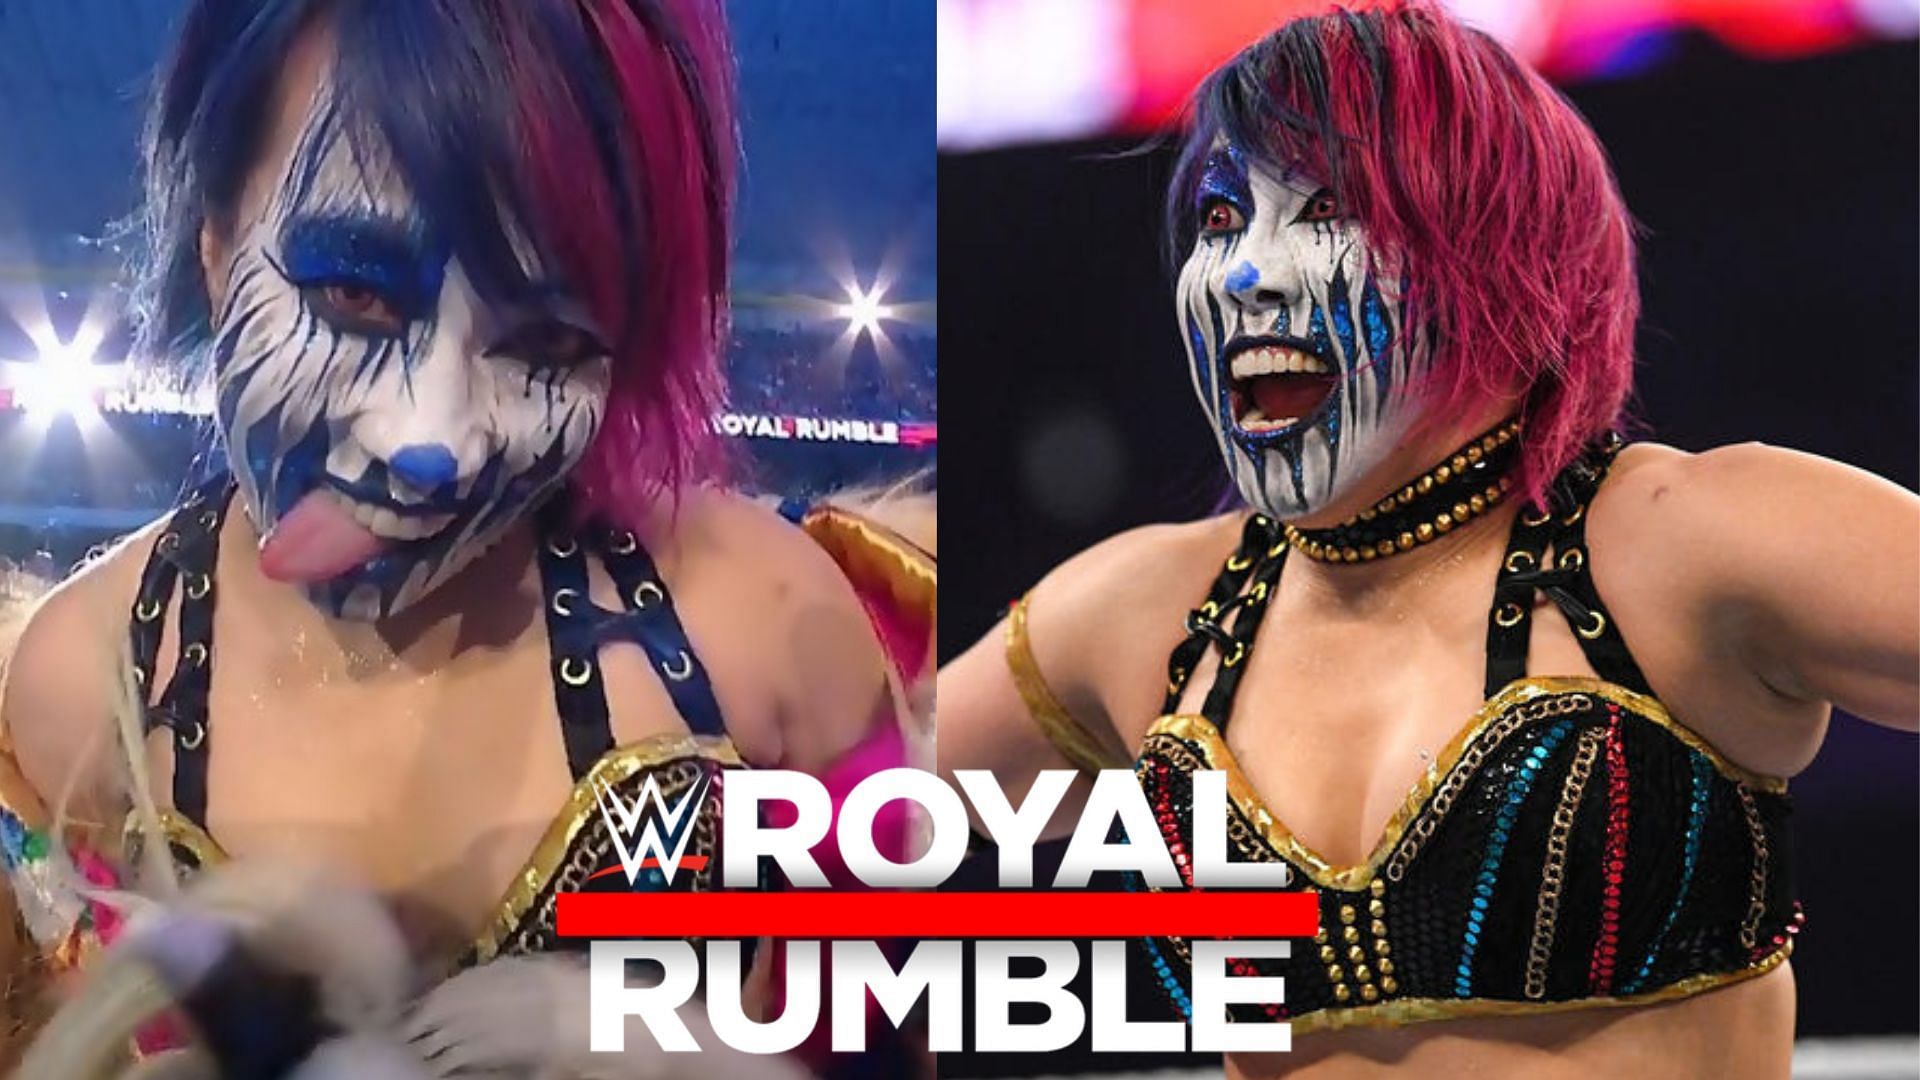 Asuka had a strong showing in the Royal Rumble match